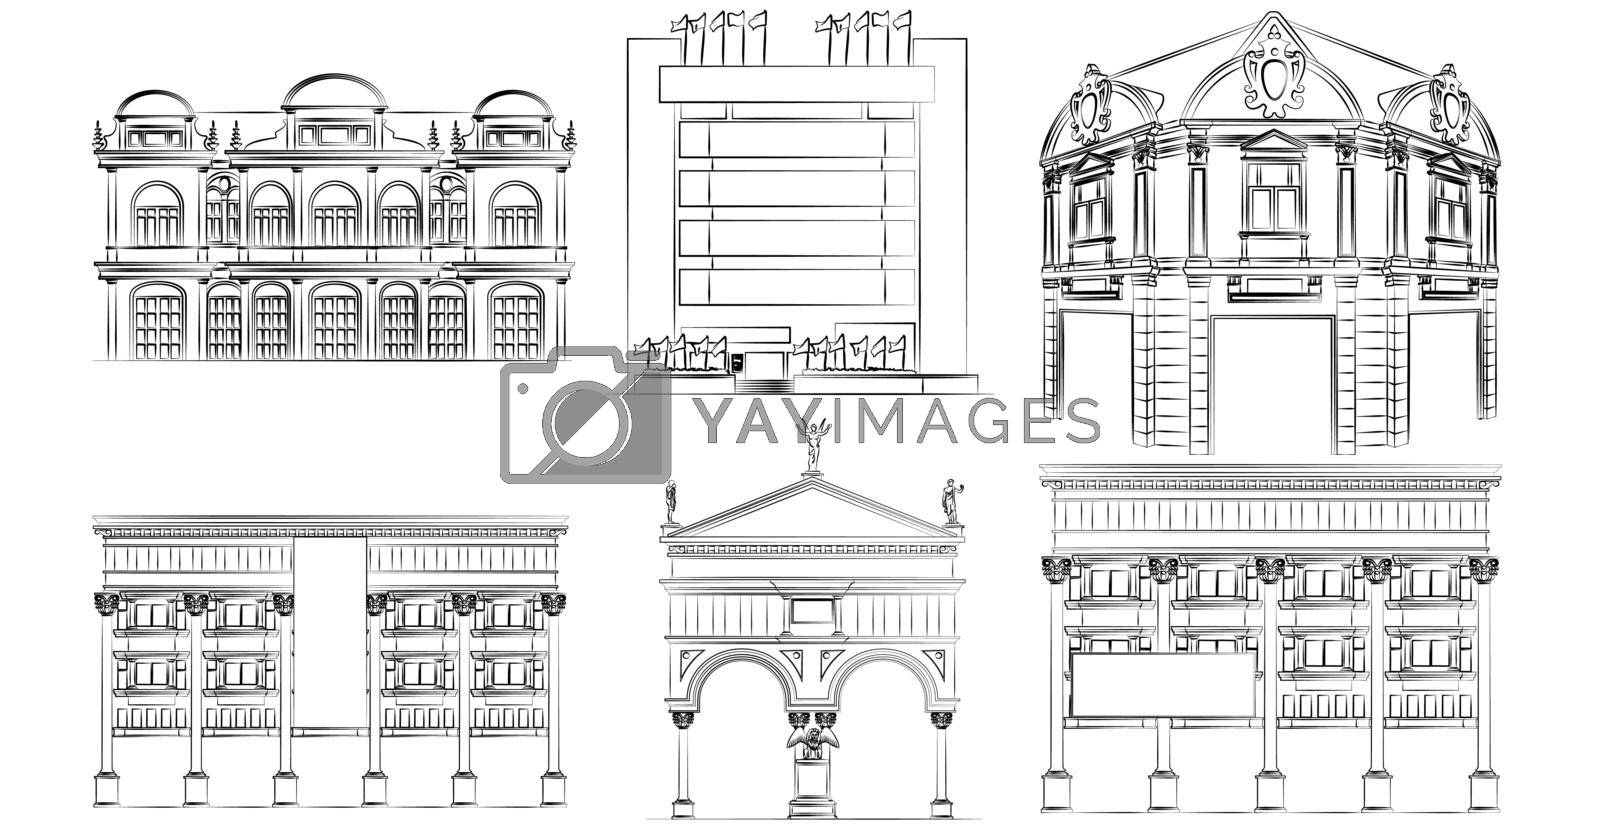 Royalty free image of doodle line art building cartoon by valueinvestor